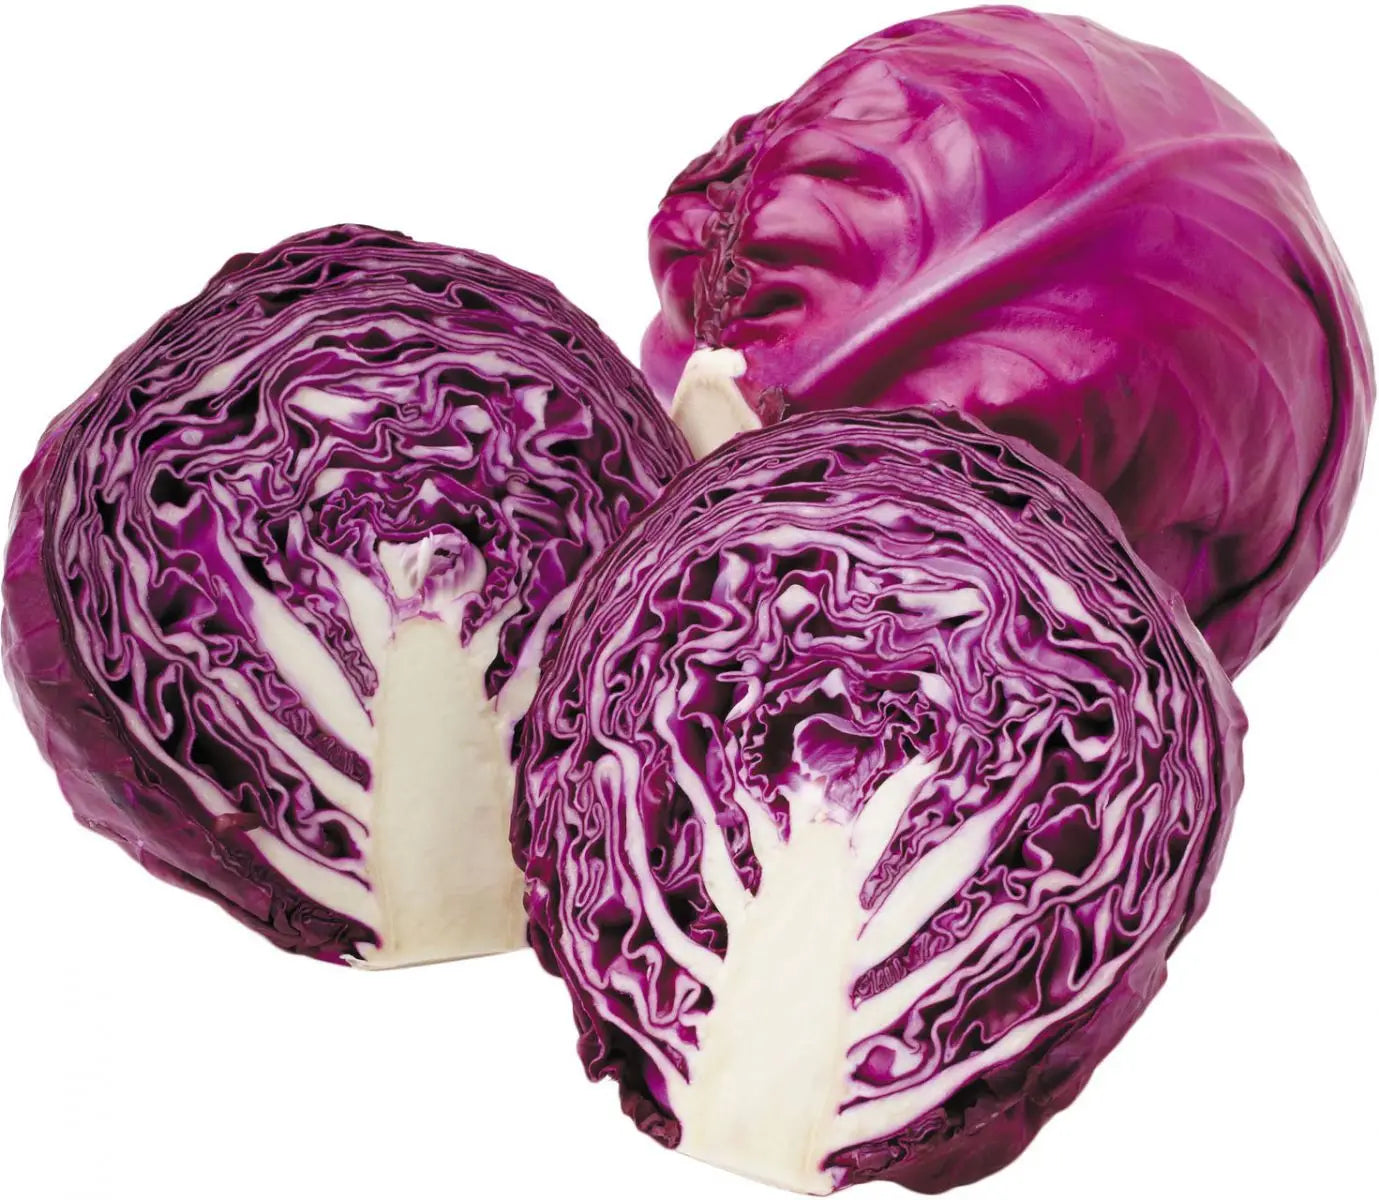 Vegetable of the month: Red cabbage - Harvard Health